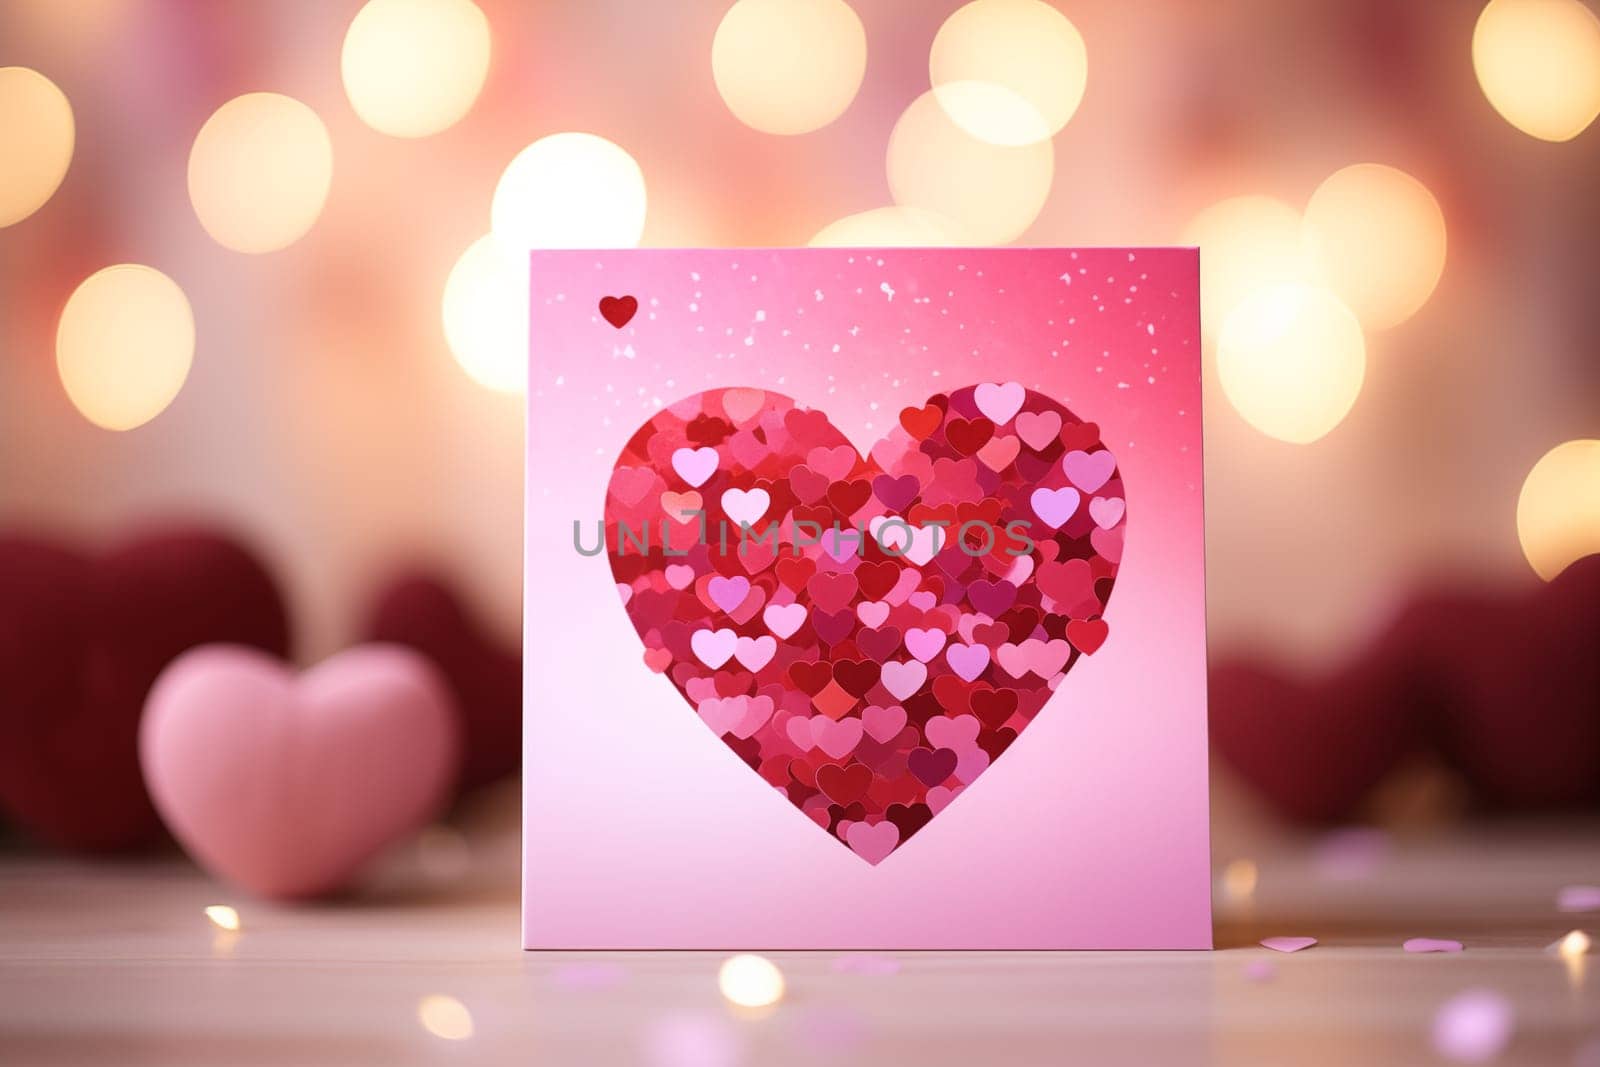 Romantic Valentine’s Day Card on Table by dimol